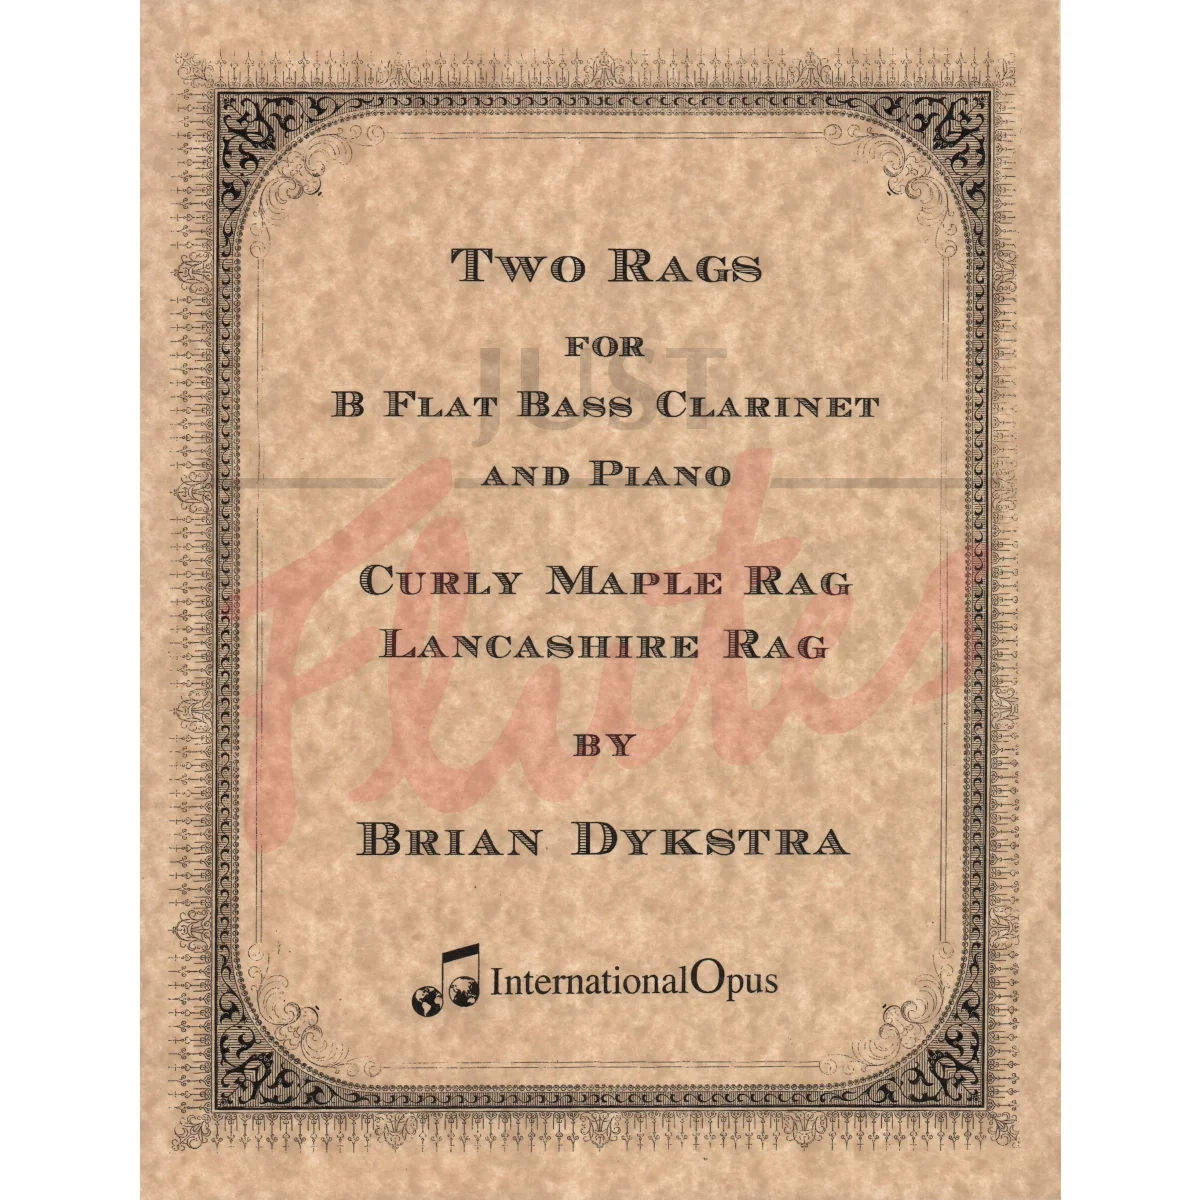 Two Rags for Bb Bass Clarinet and Piano